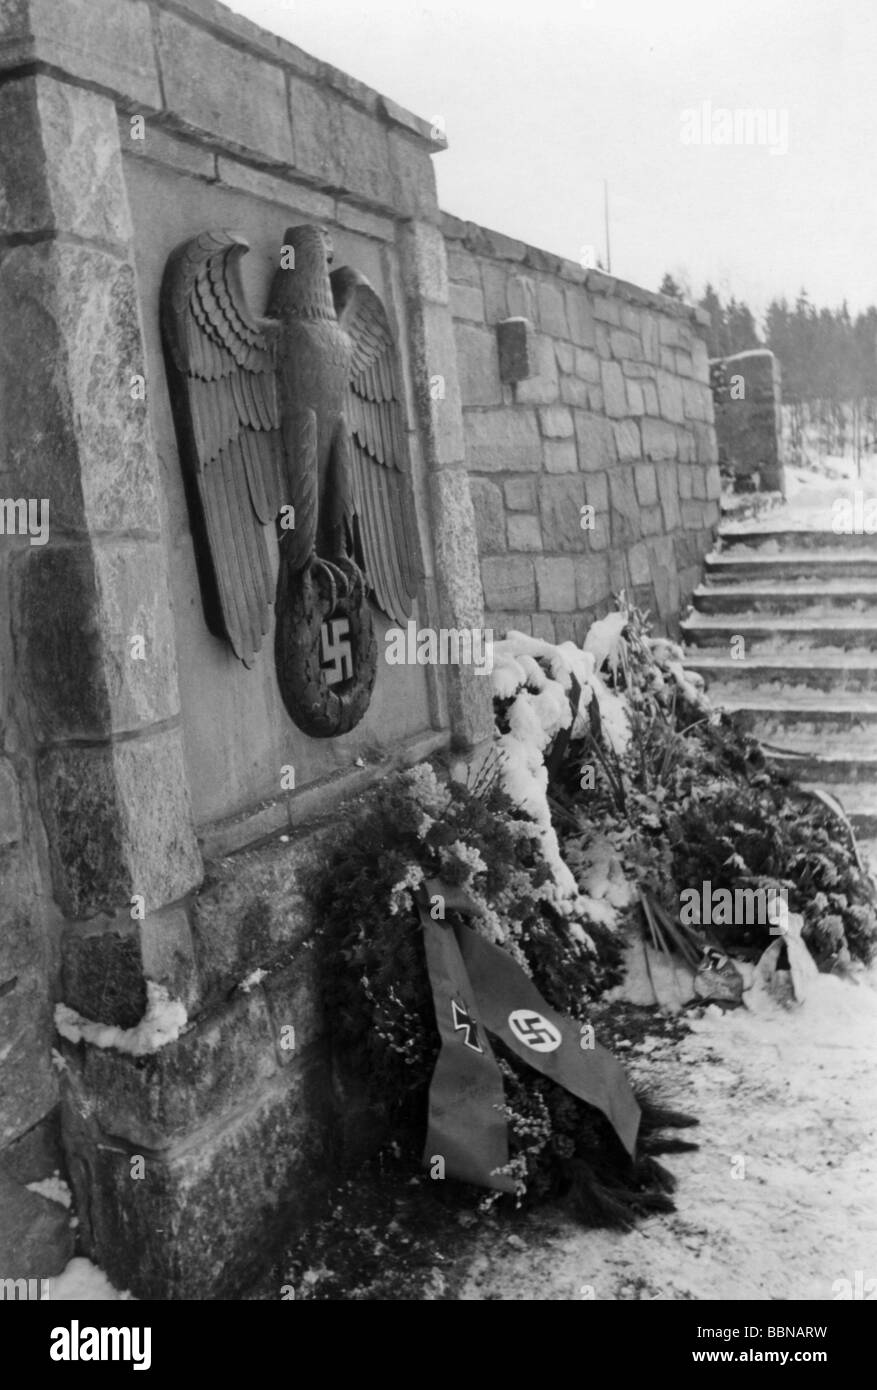 Nazism / National Socialism, emblems, imperial eagle (Reichsadler) at the entrance of a German military cemetery, circa 1942, Stock Photo